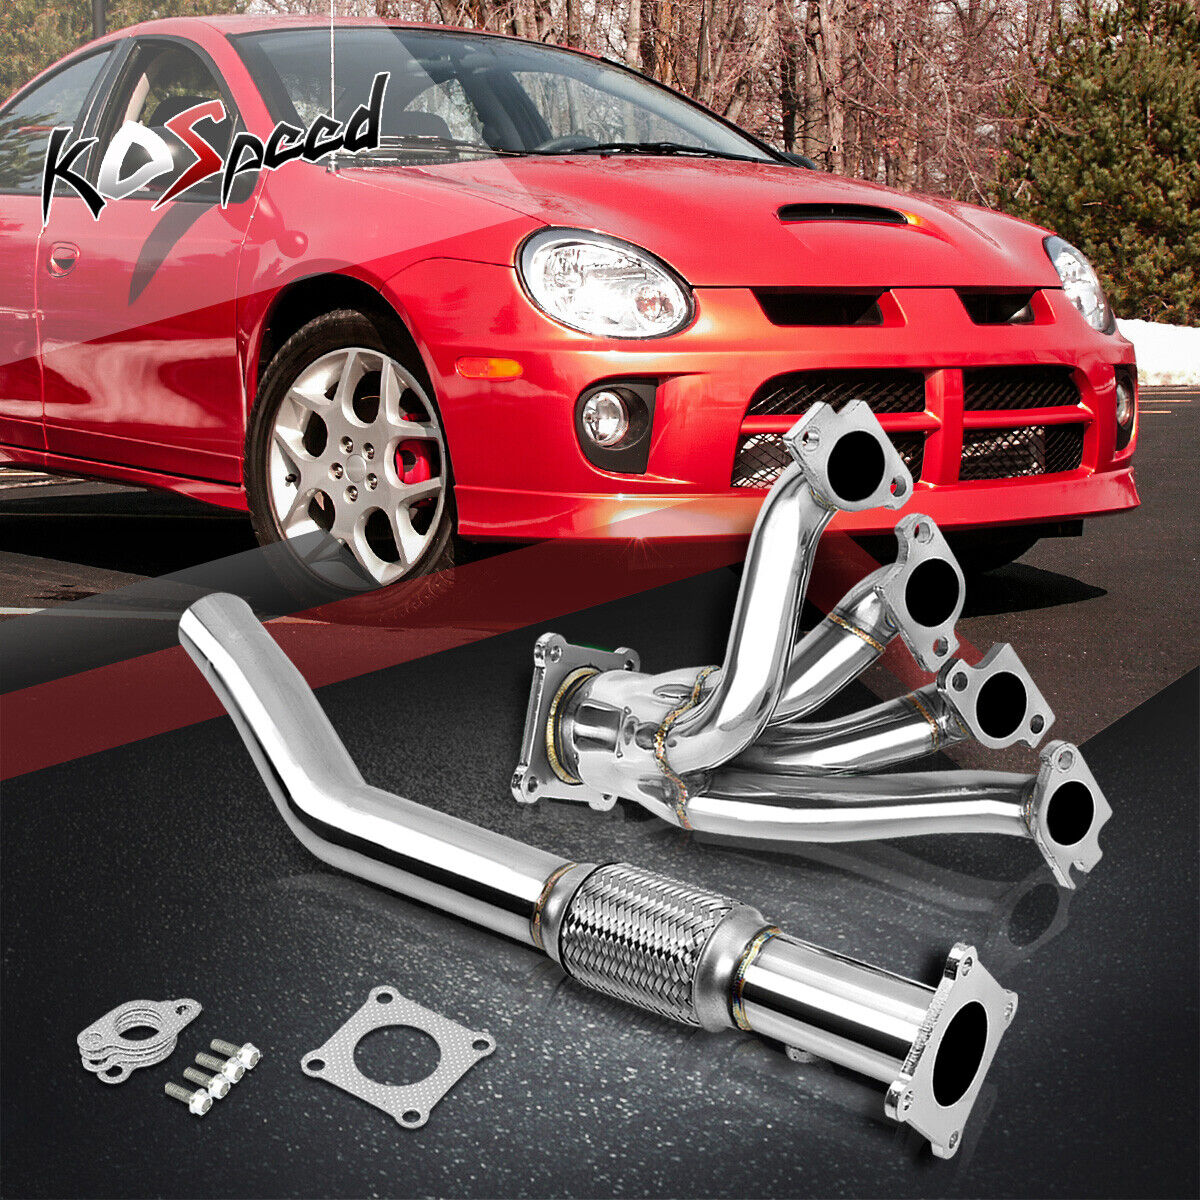 STAINLESS STEEL RACING EXHAUST HEADER FOR 00-05 DODGE NEON 2.0L SOHC 4CYL A588